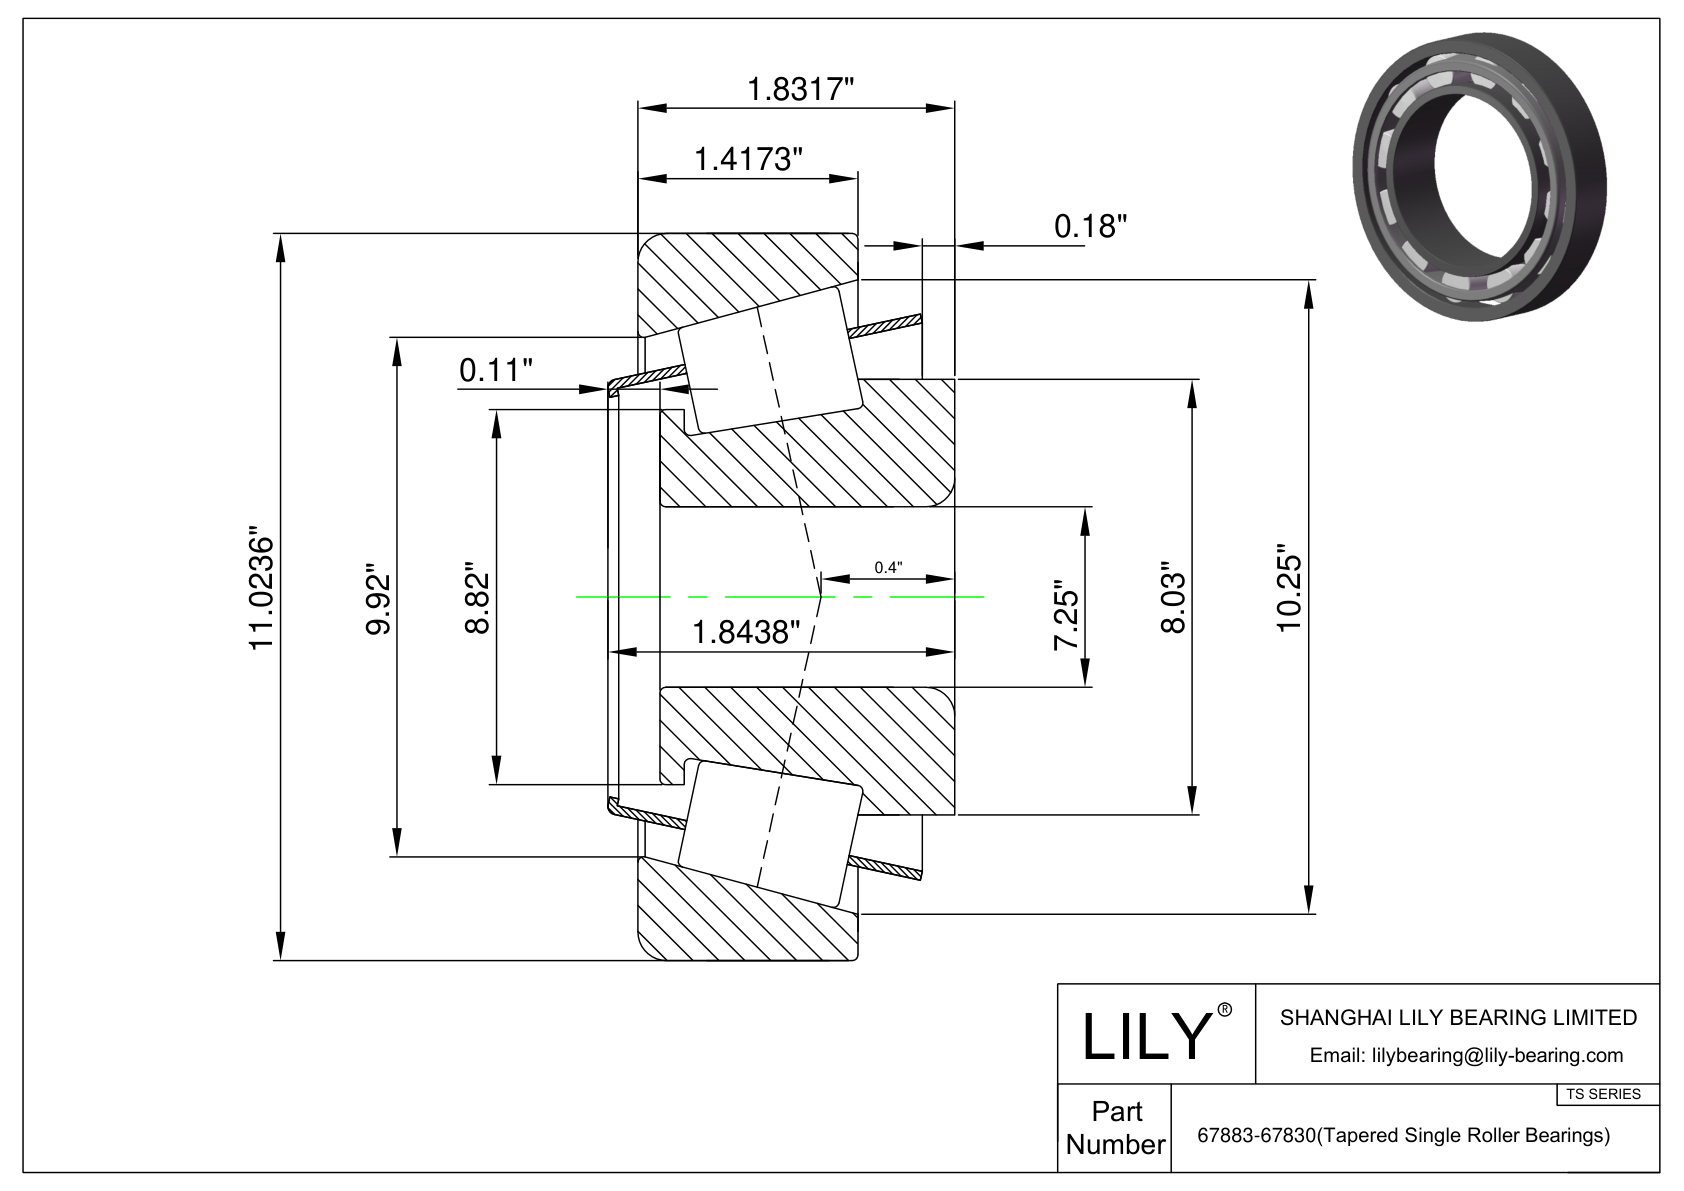 67883-67830 TS (Tapered Single Roller Bearings) (Imperial) cad drawing